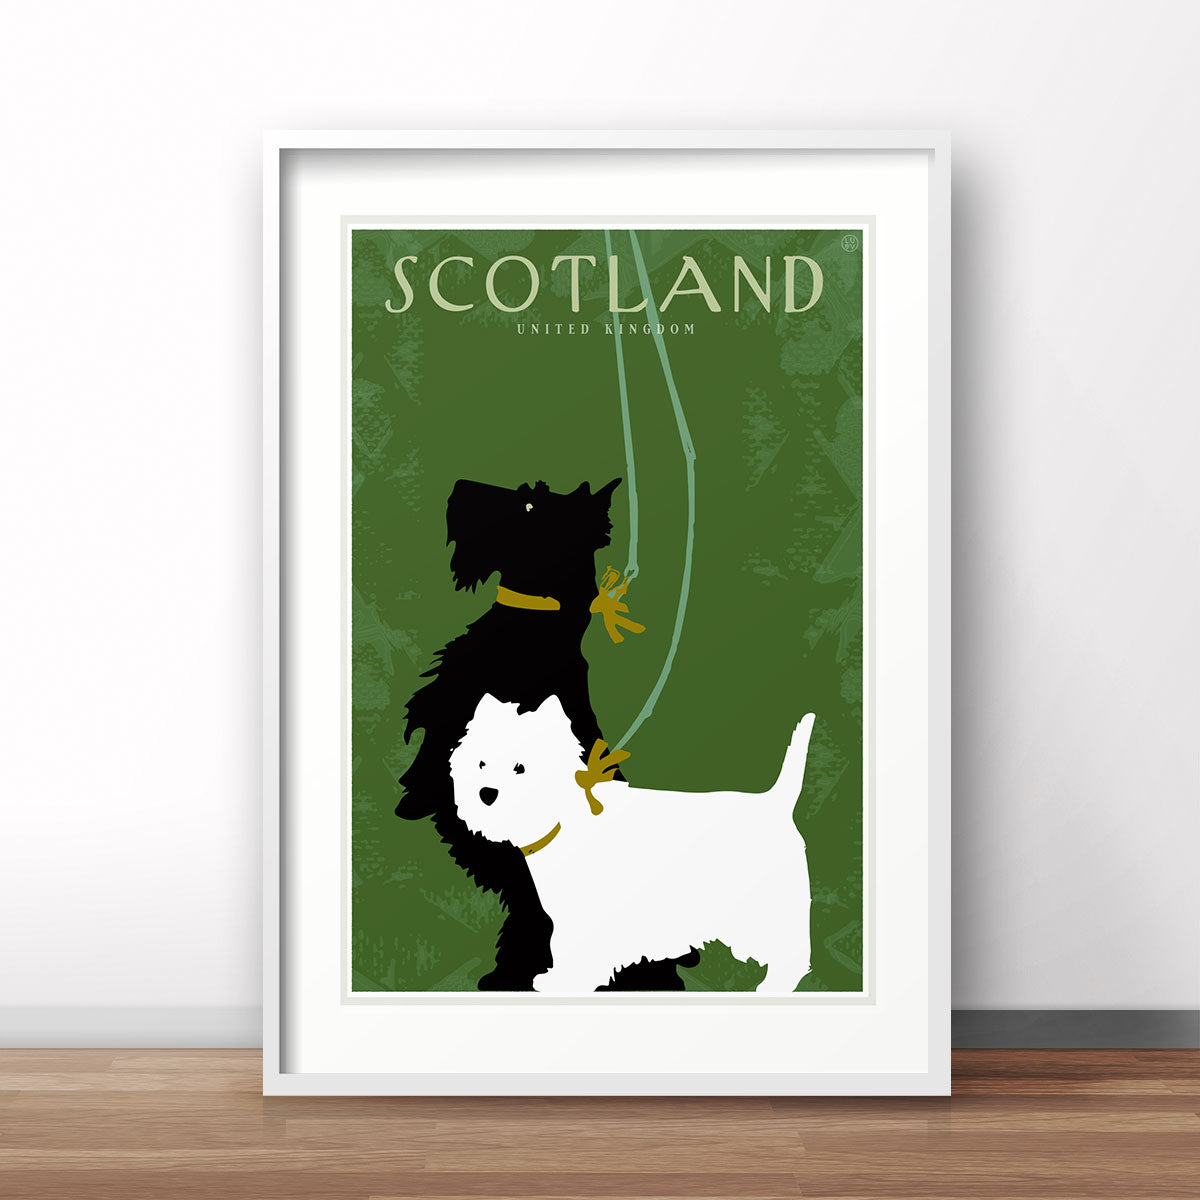 Scotland retro vintage travel poster print from Places We Luv